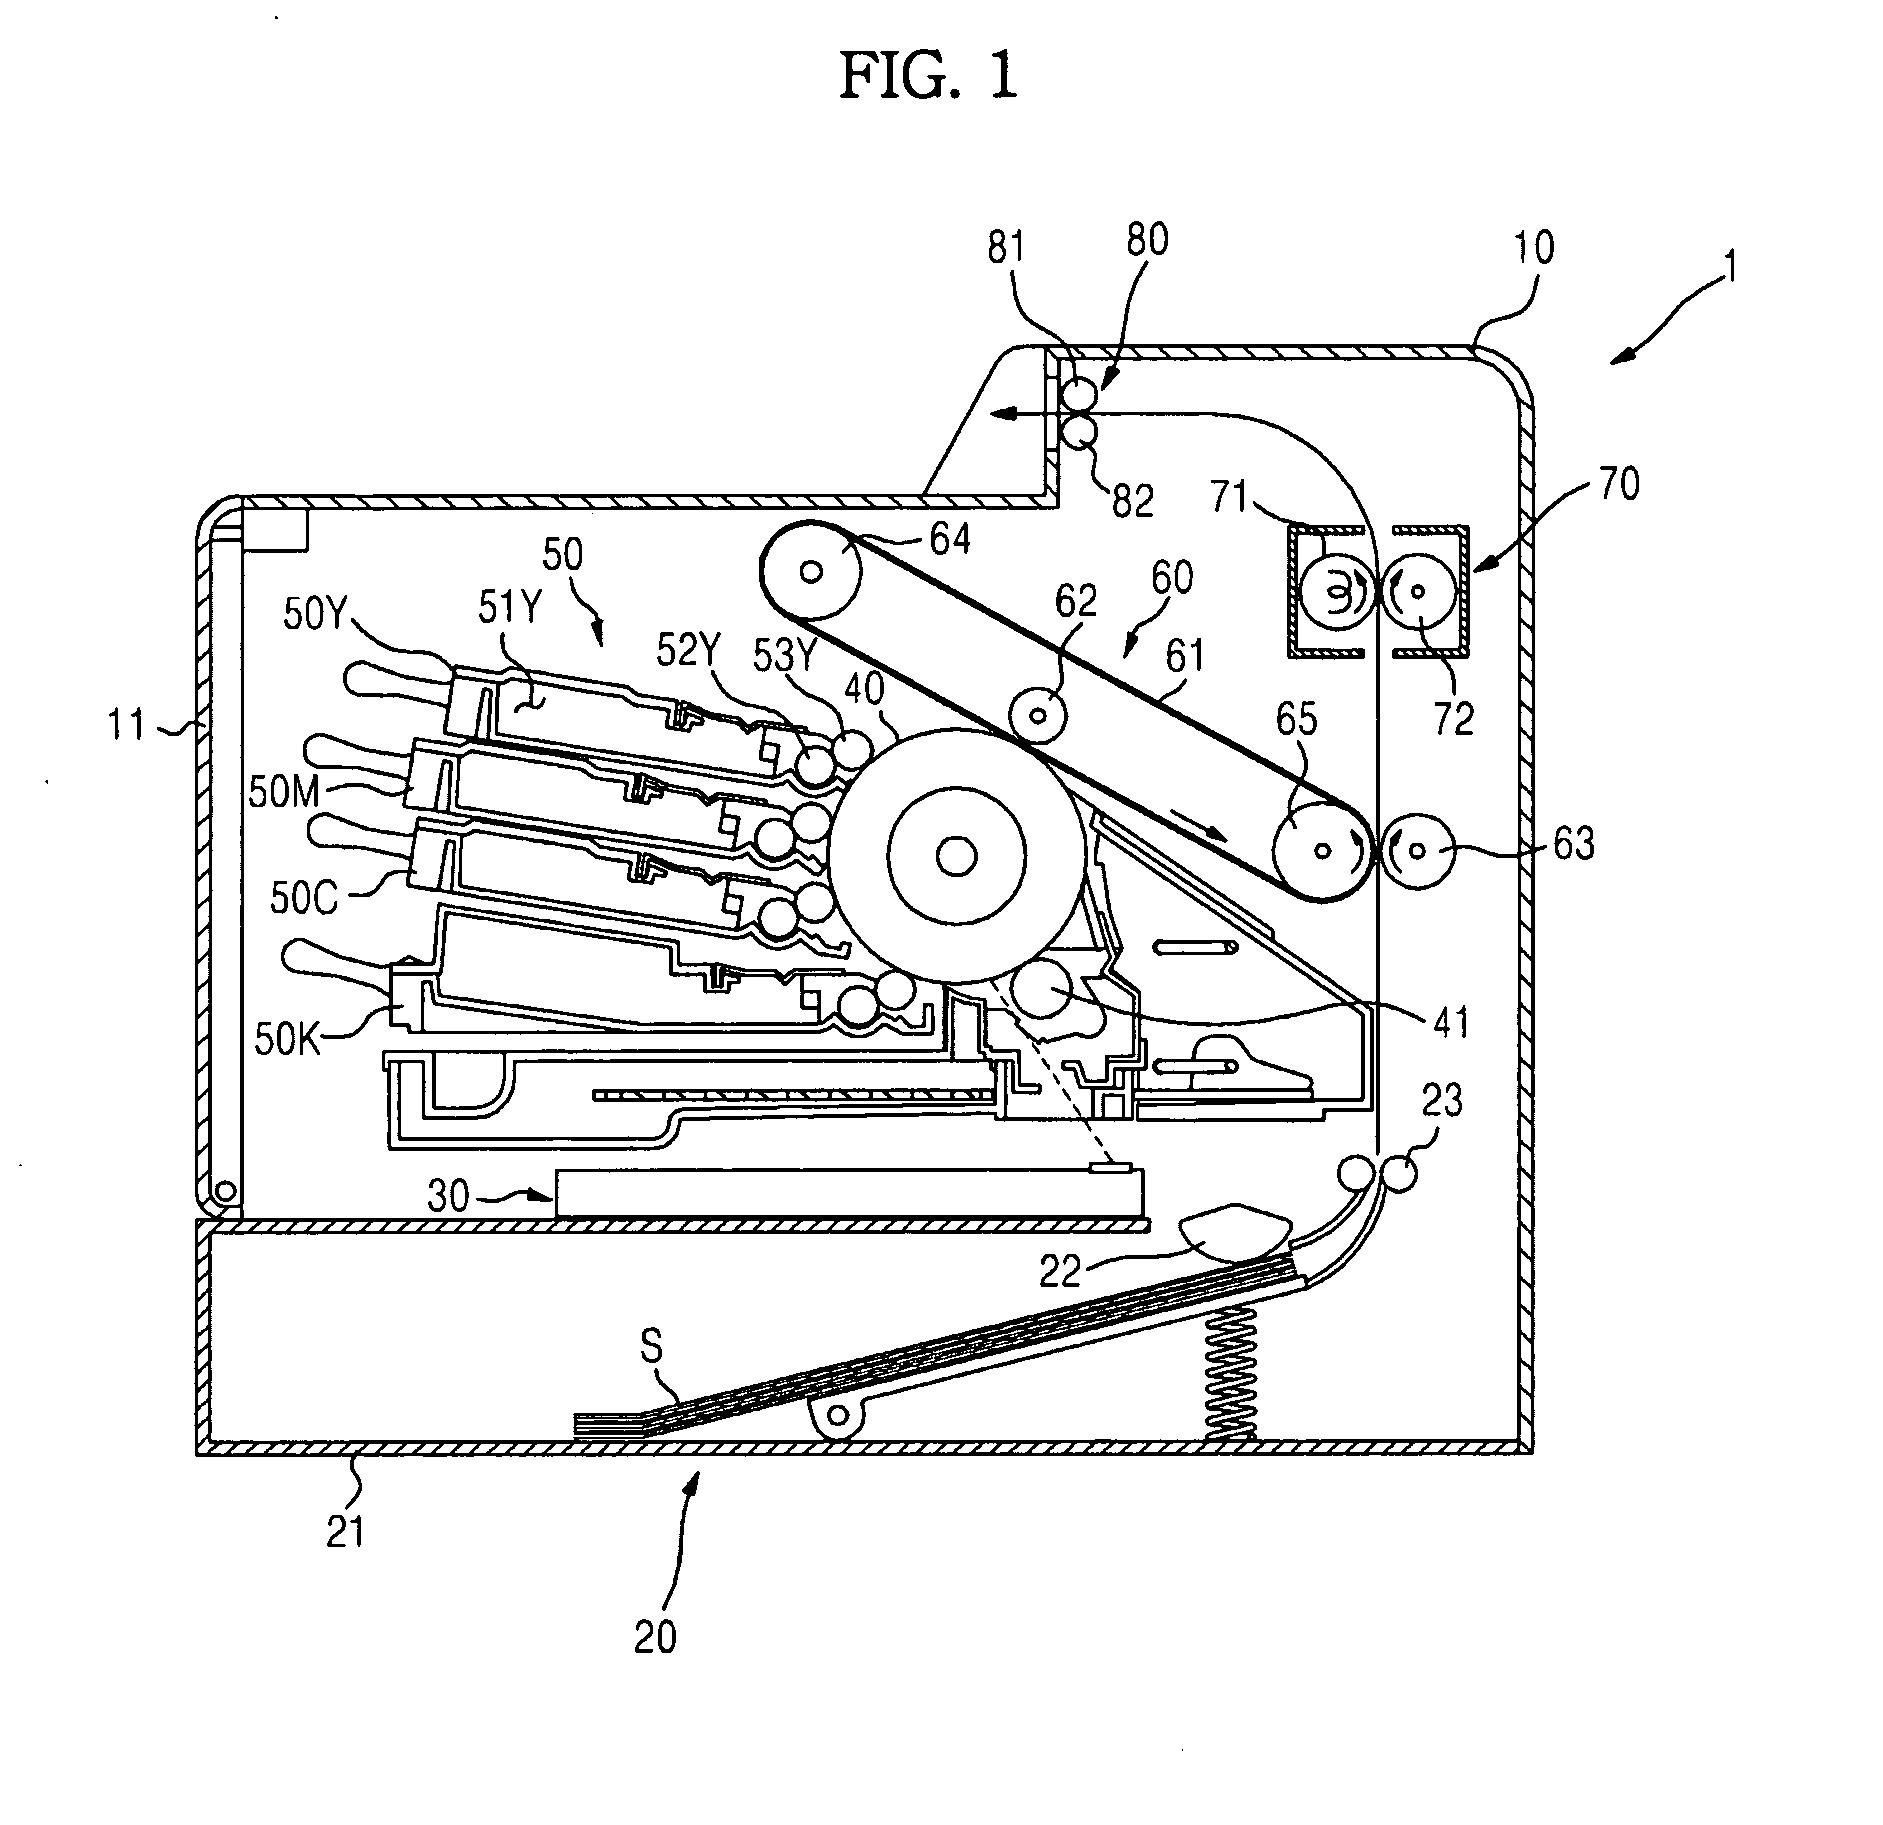 Image forming apparatus with developing units having different voltage levels